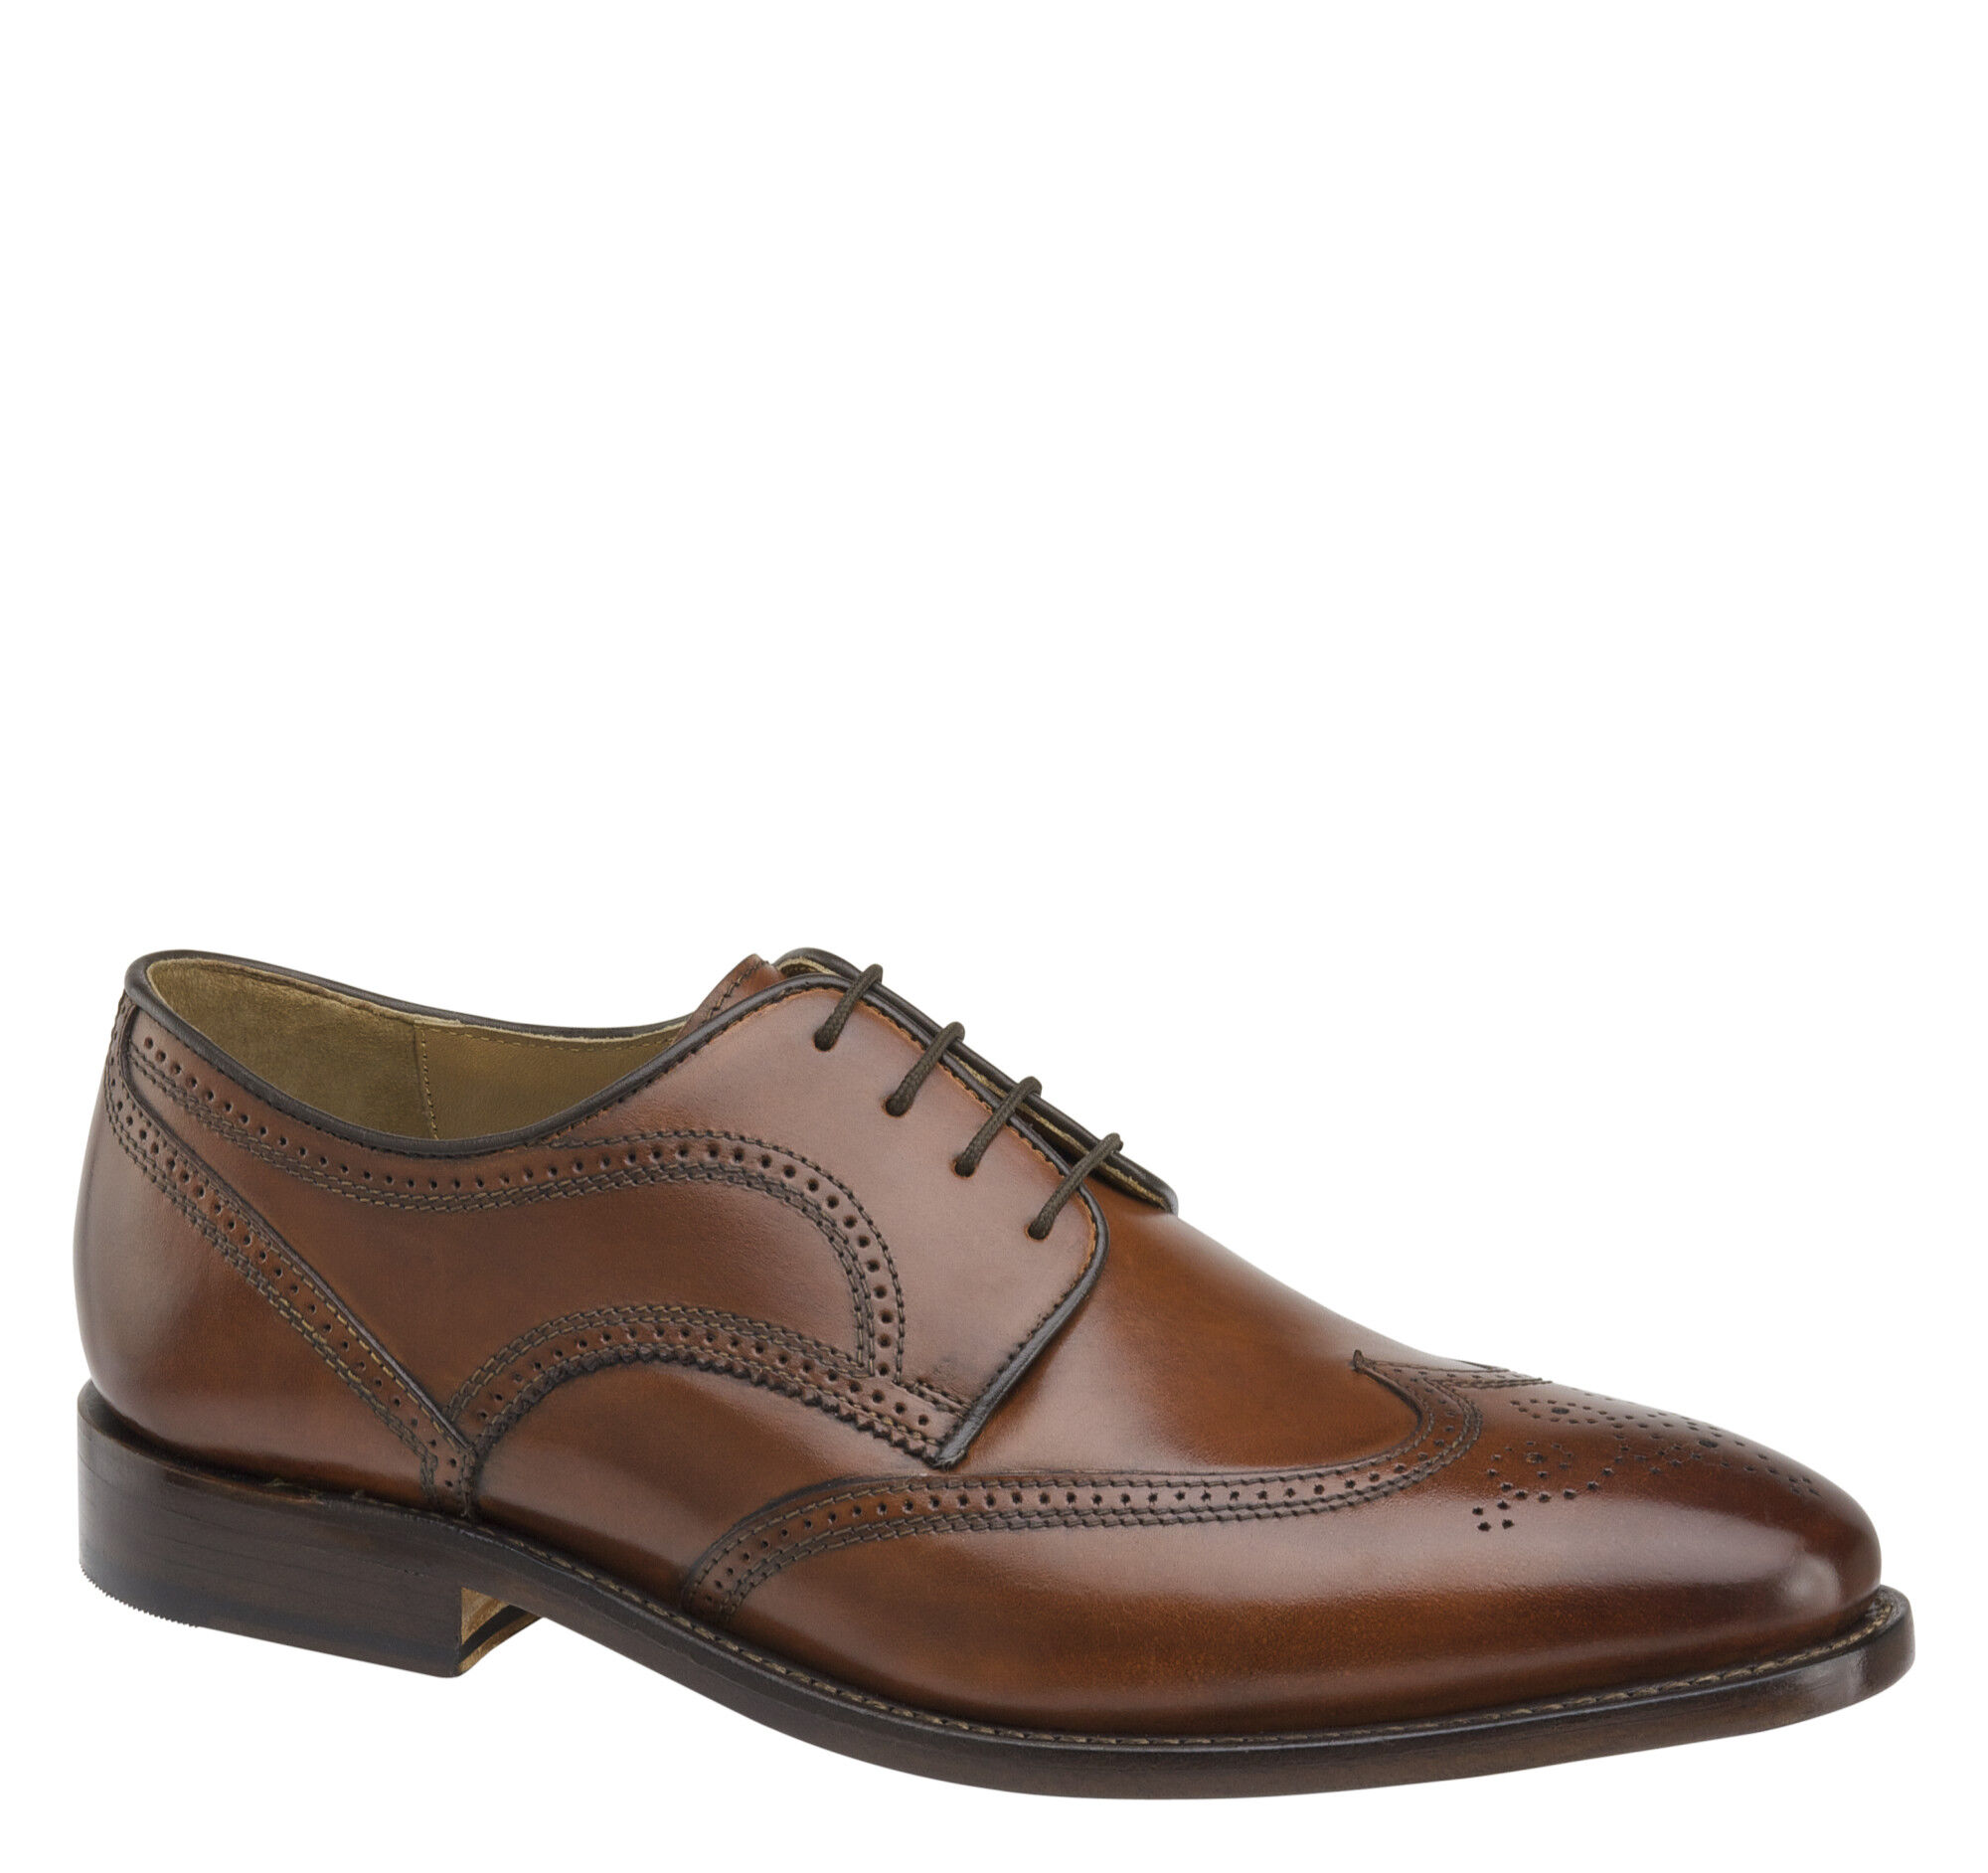 johnston and murphy wingtip shoes